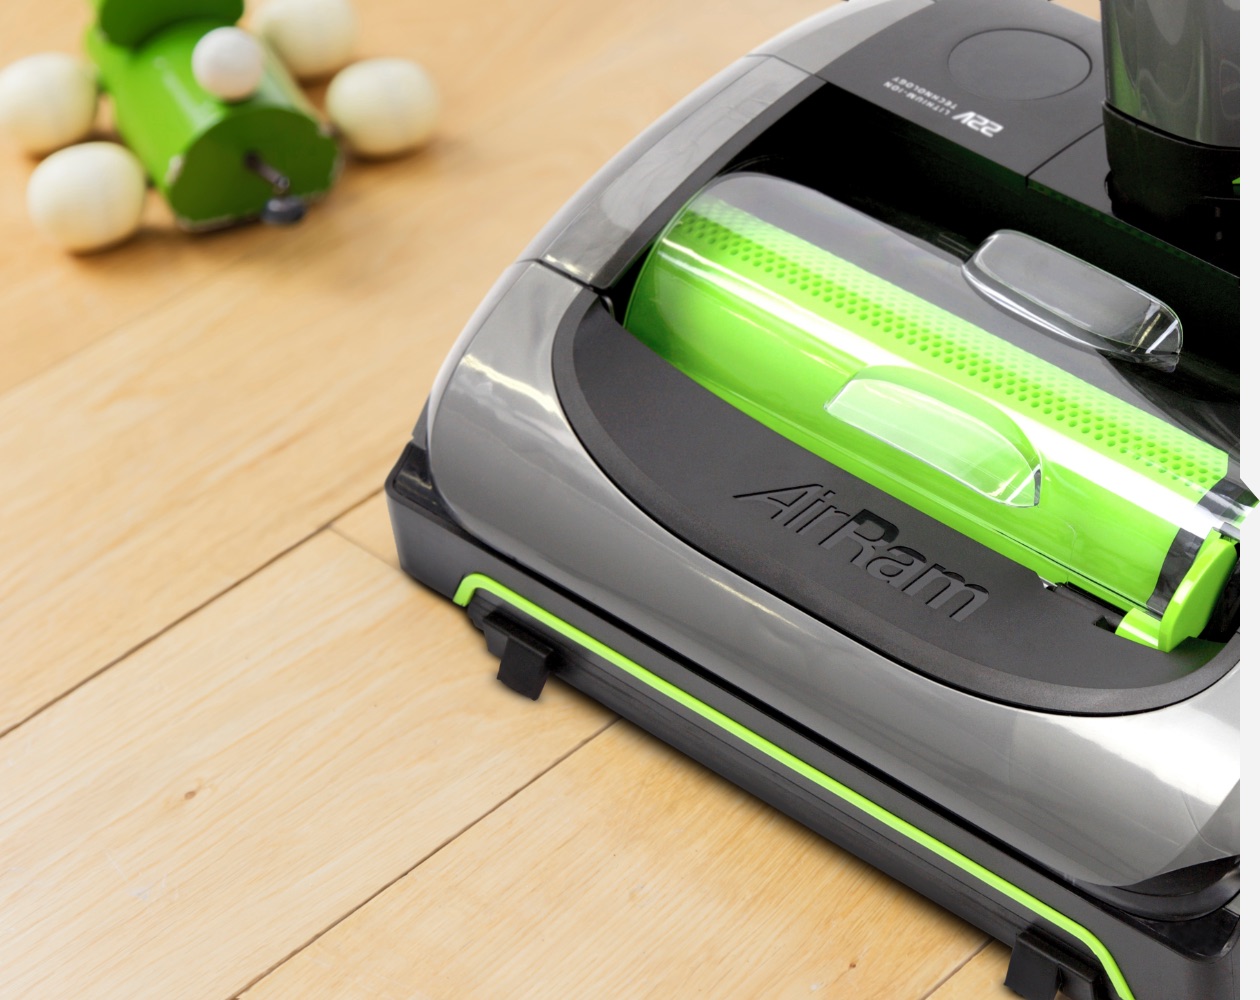 AirRam cordless vacuum cleaner great for edge cleaning